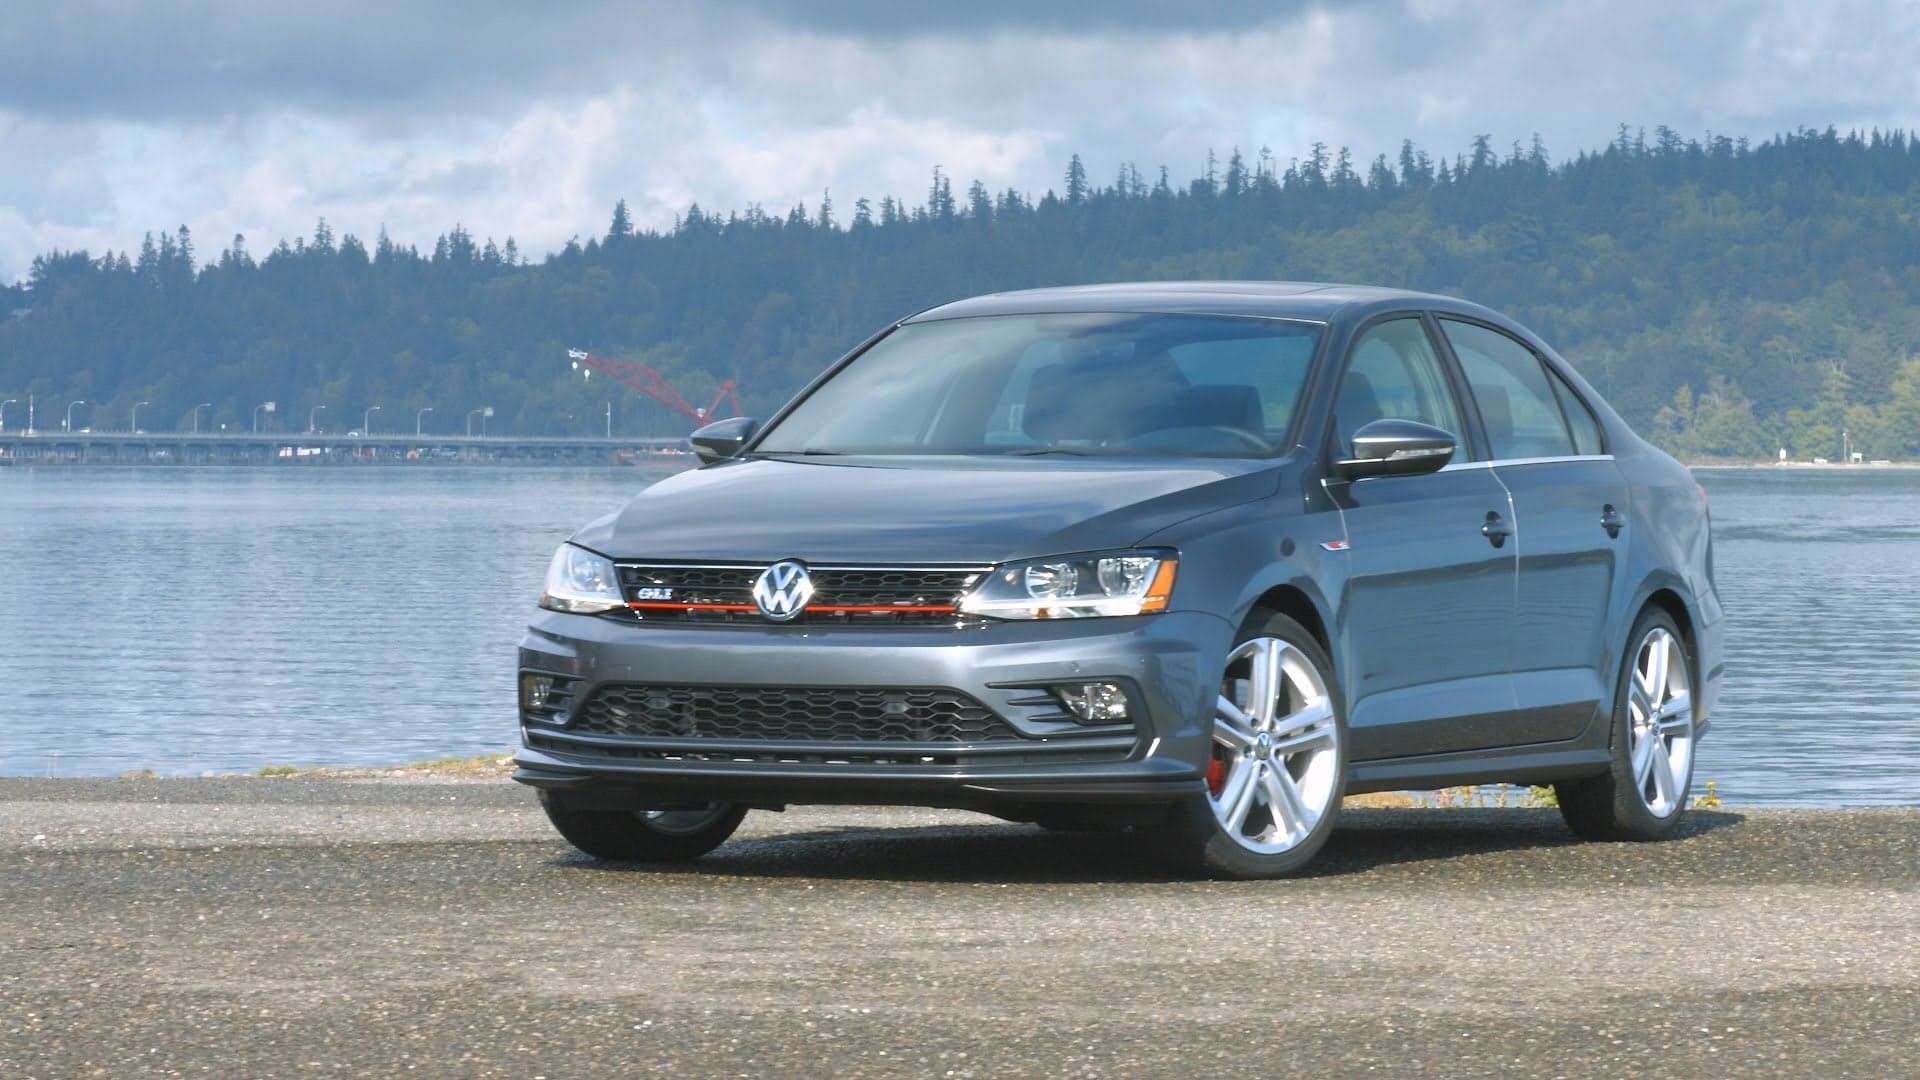 Next Generation VW Jetta To Go Into Production This Year